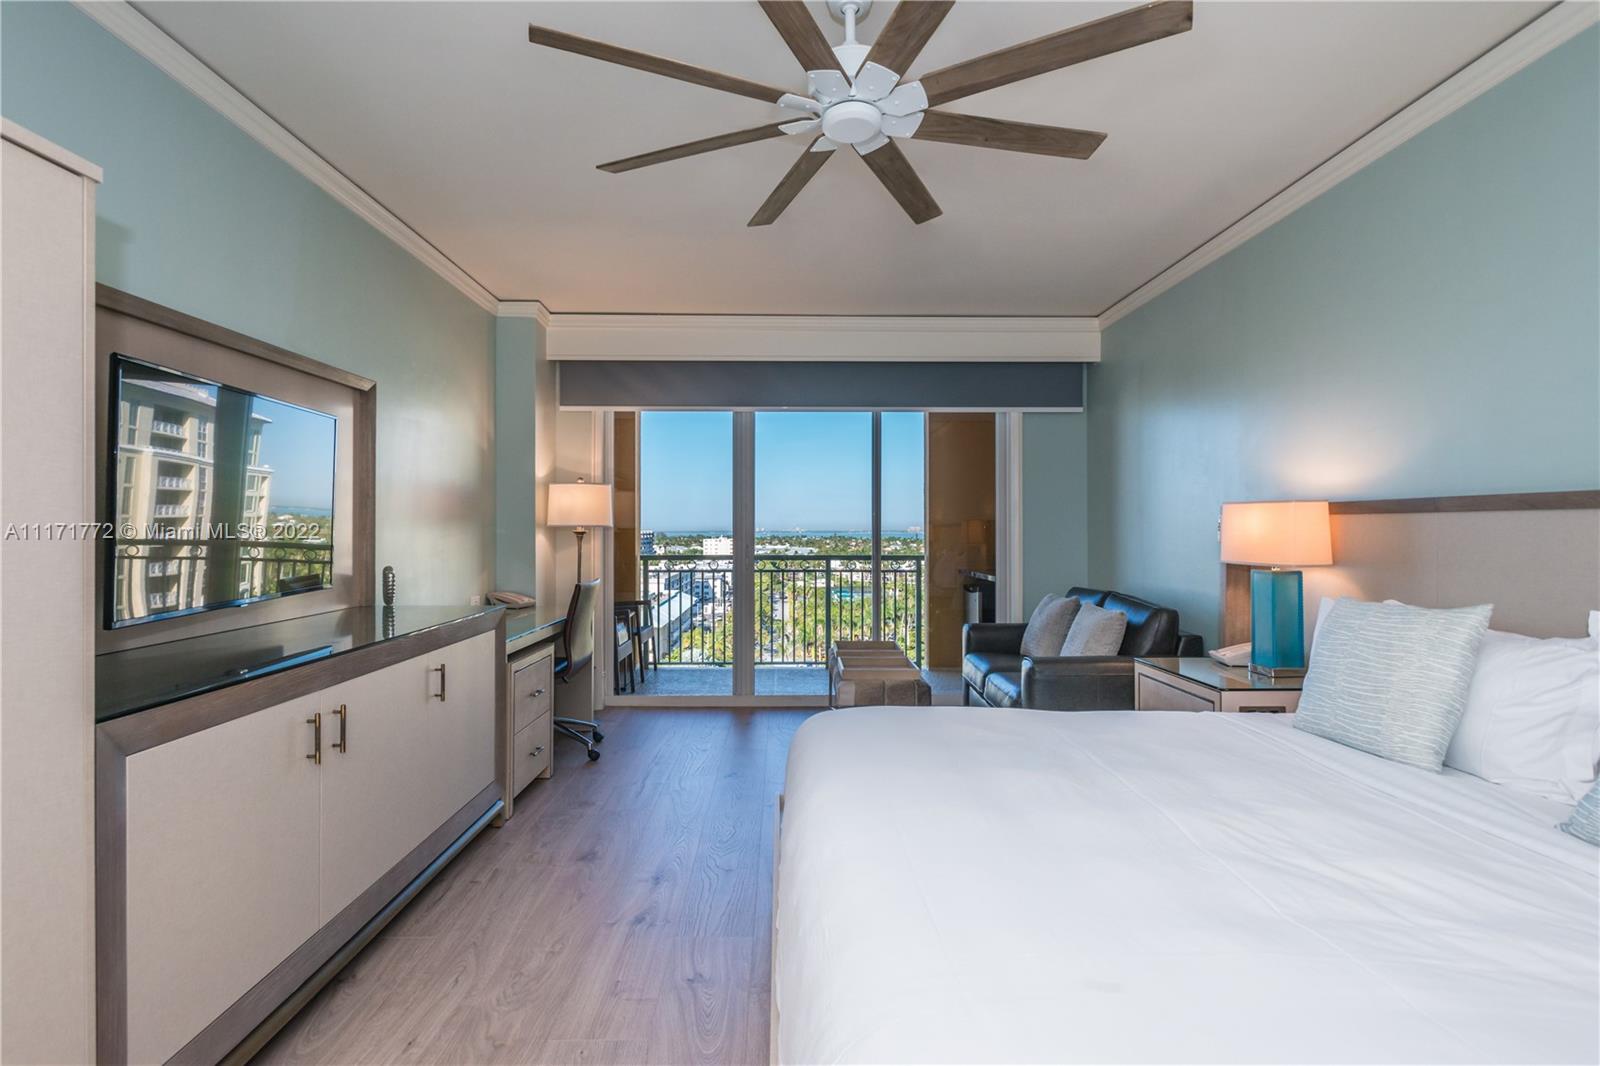 Take advantage of this SHORT-TERM RENTAL AT THE RITZ-CARLTON HOTEL in Key Biscayne. This unit has been renovated and is fully furnished with high end finishes. Enjoy your vacation in this luxurious condo hotel residence while having access to all of the hotel amenities.
Please, call or text listing agent for availability.